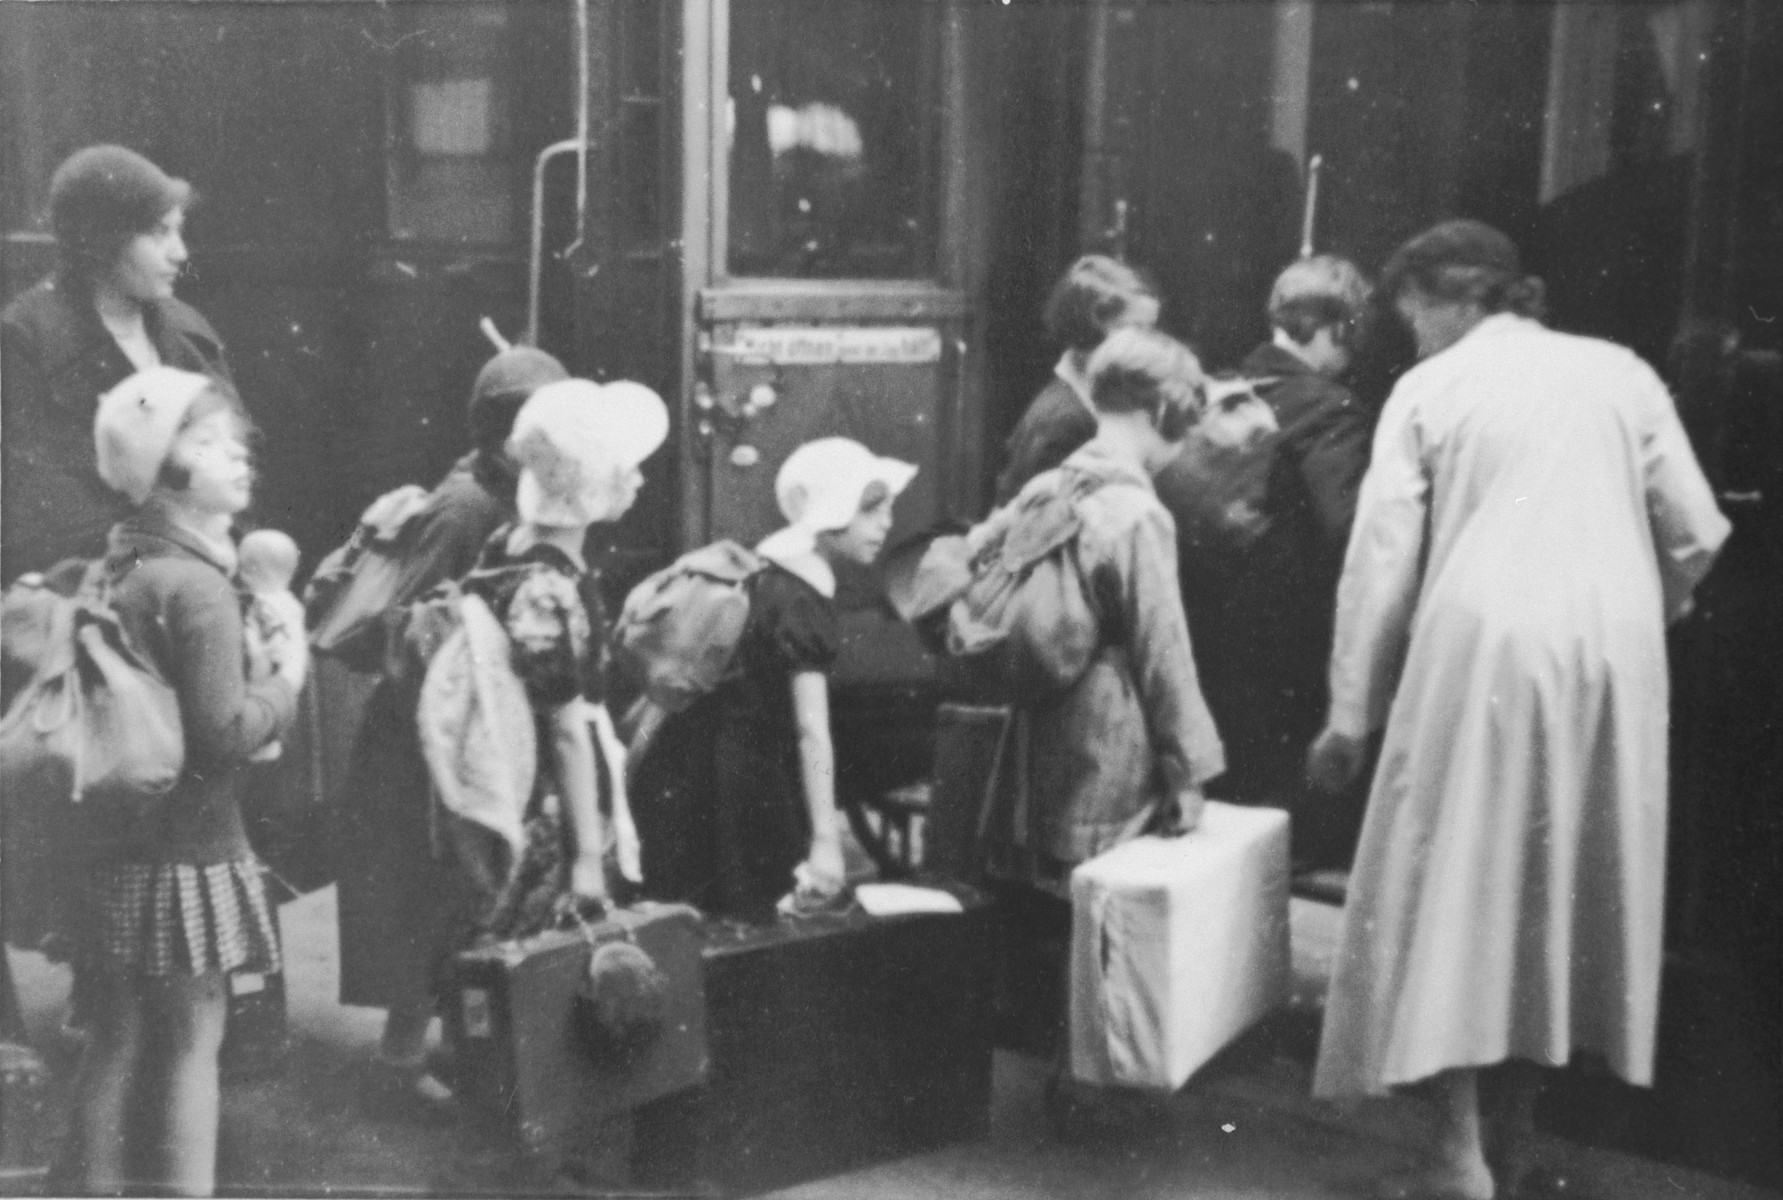 Jewish children from Germany who are on their way to a Kinderlager [children's recreational summer camp] in Horserod, Denmark, board the train with their luggage. 
 
In 1935-36 Norbert Wollheim was involved in organizing groups of German Jewish youth to attend a summer camp in Denmark.